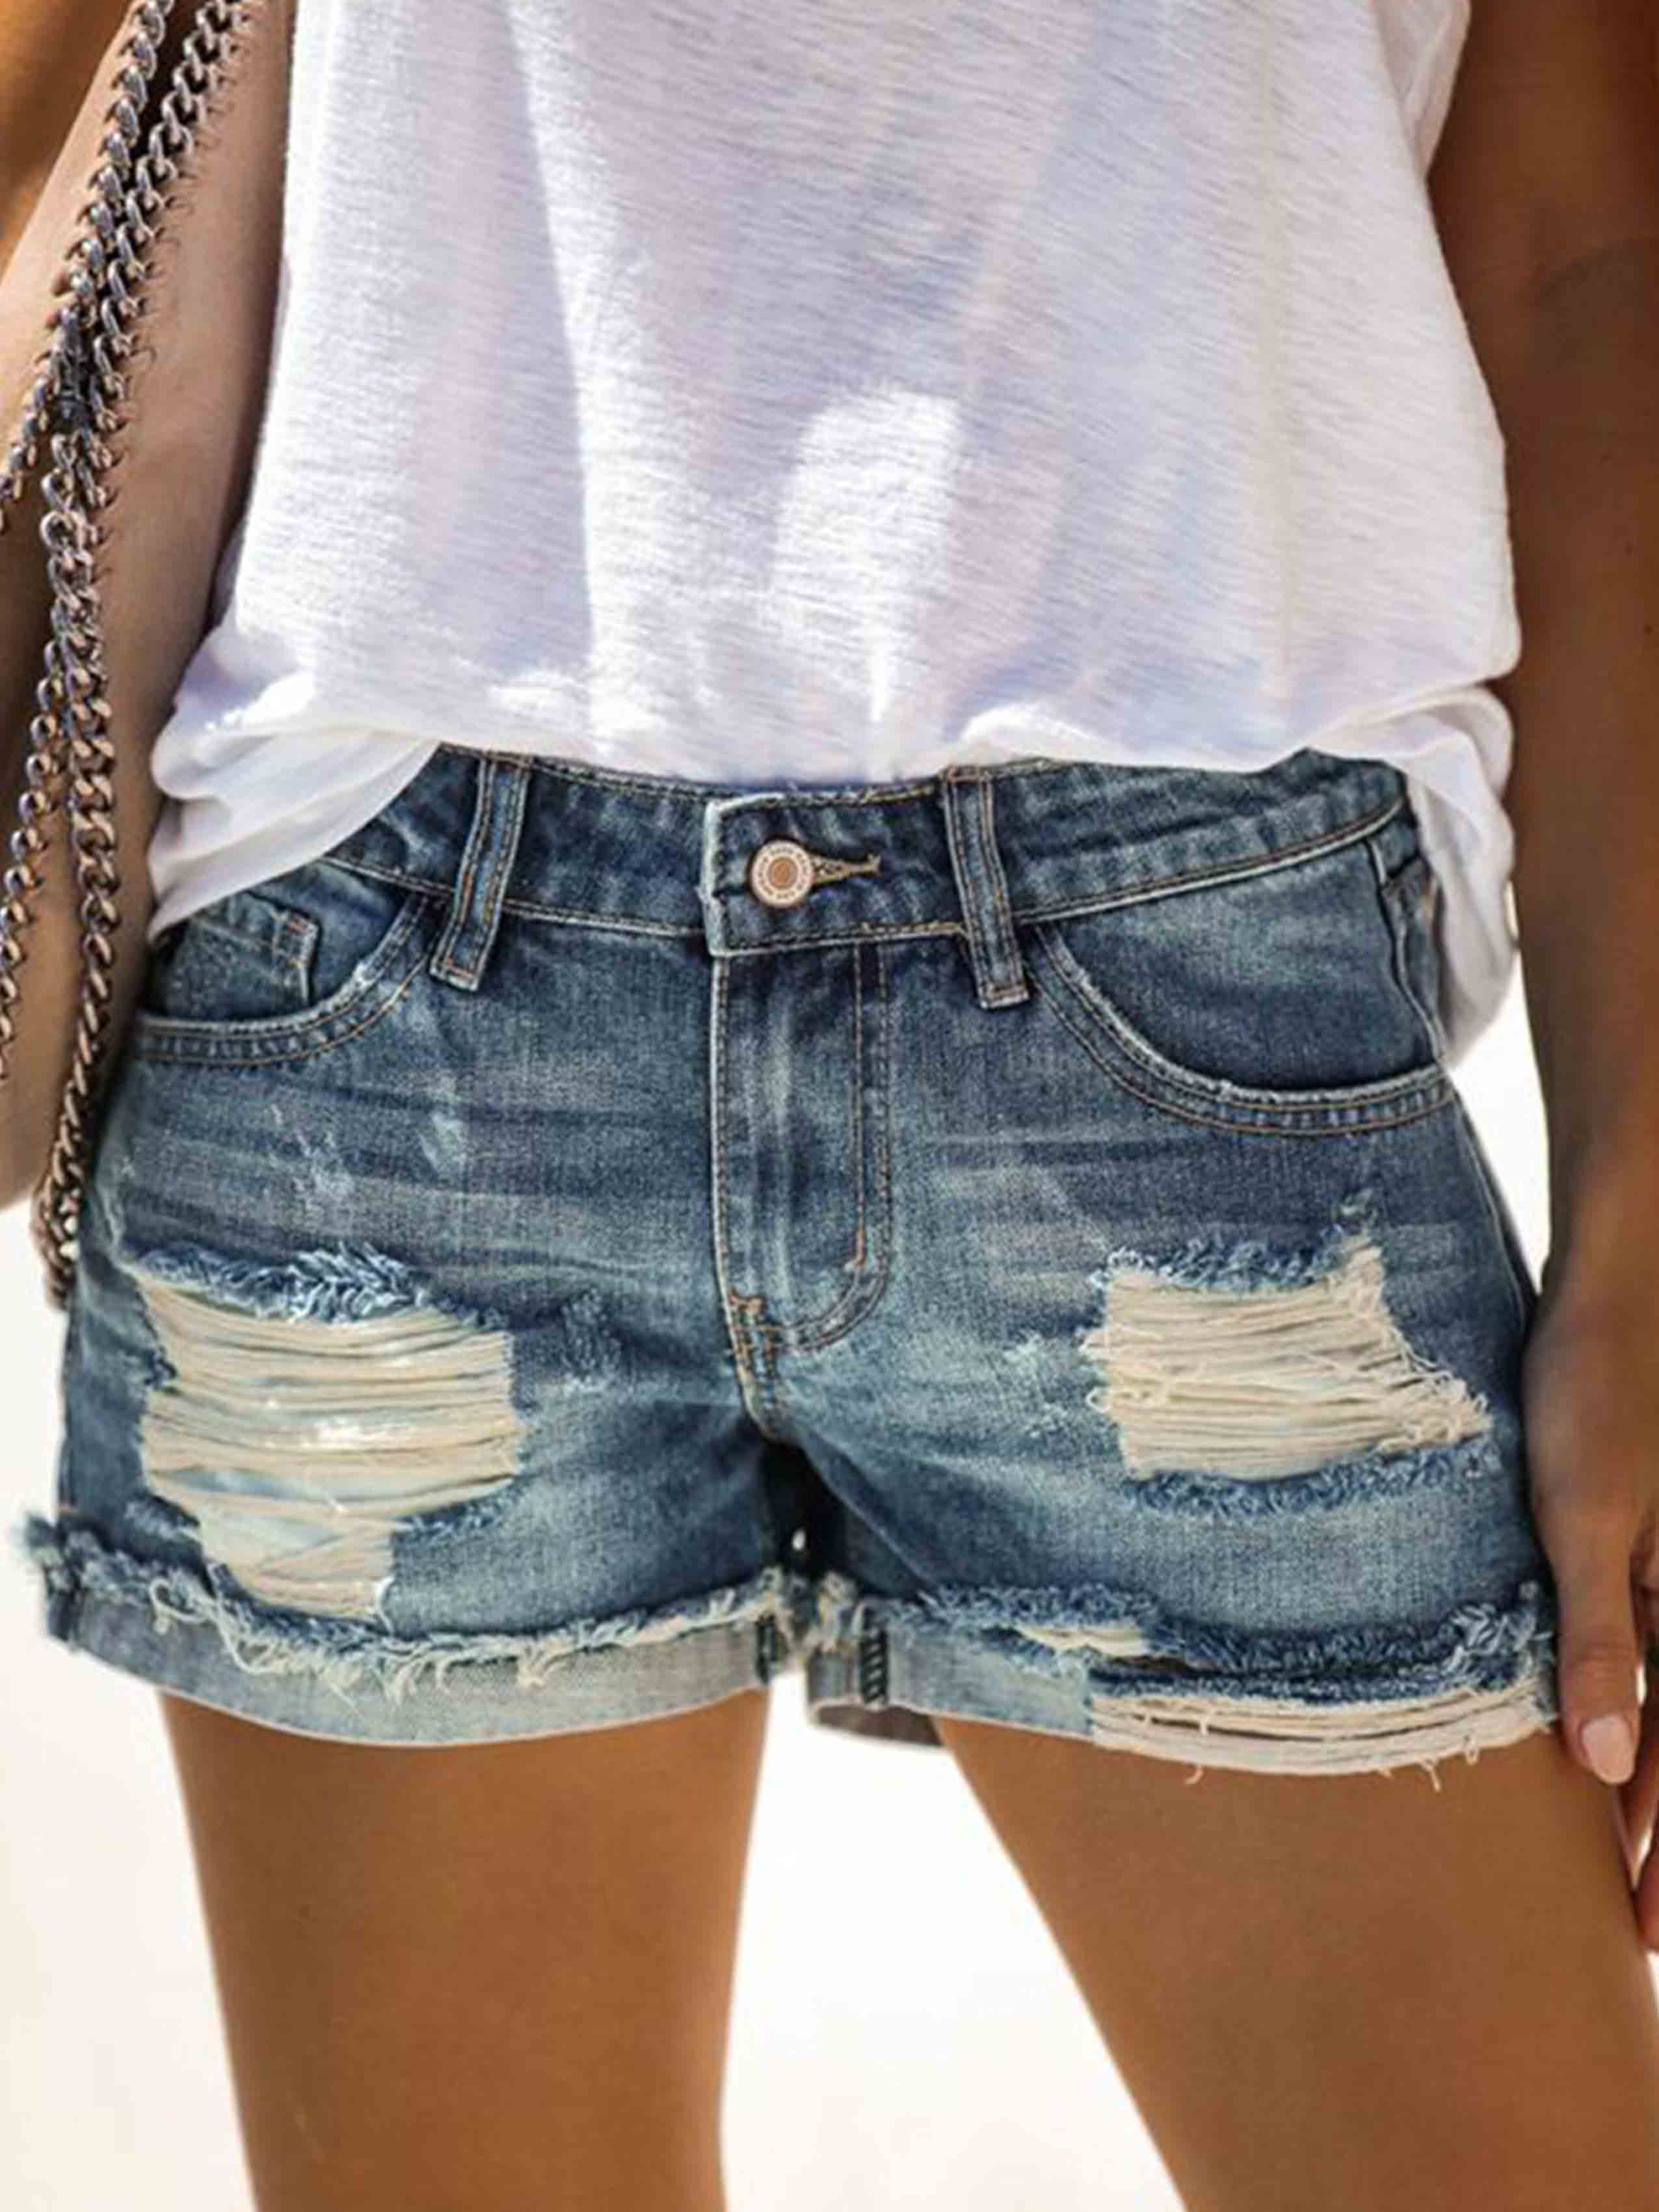 Vorioal Ripped Jean Shorts